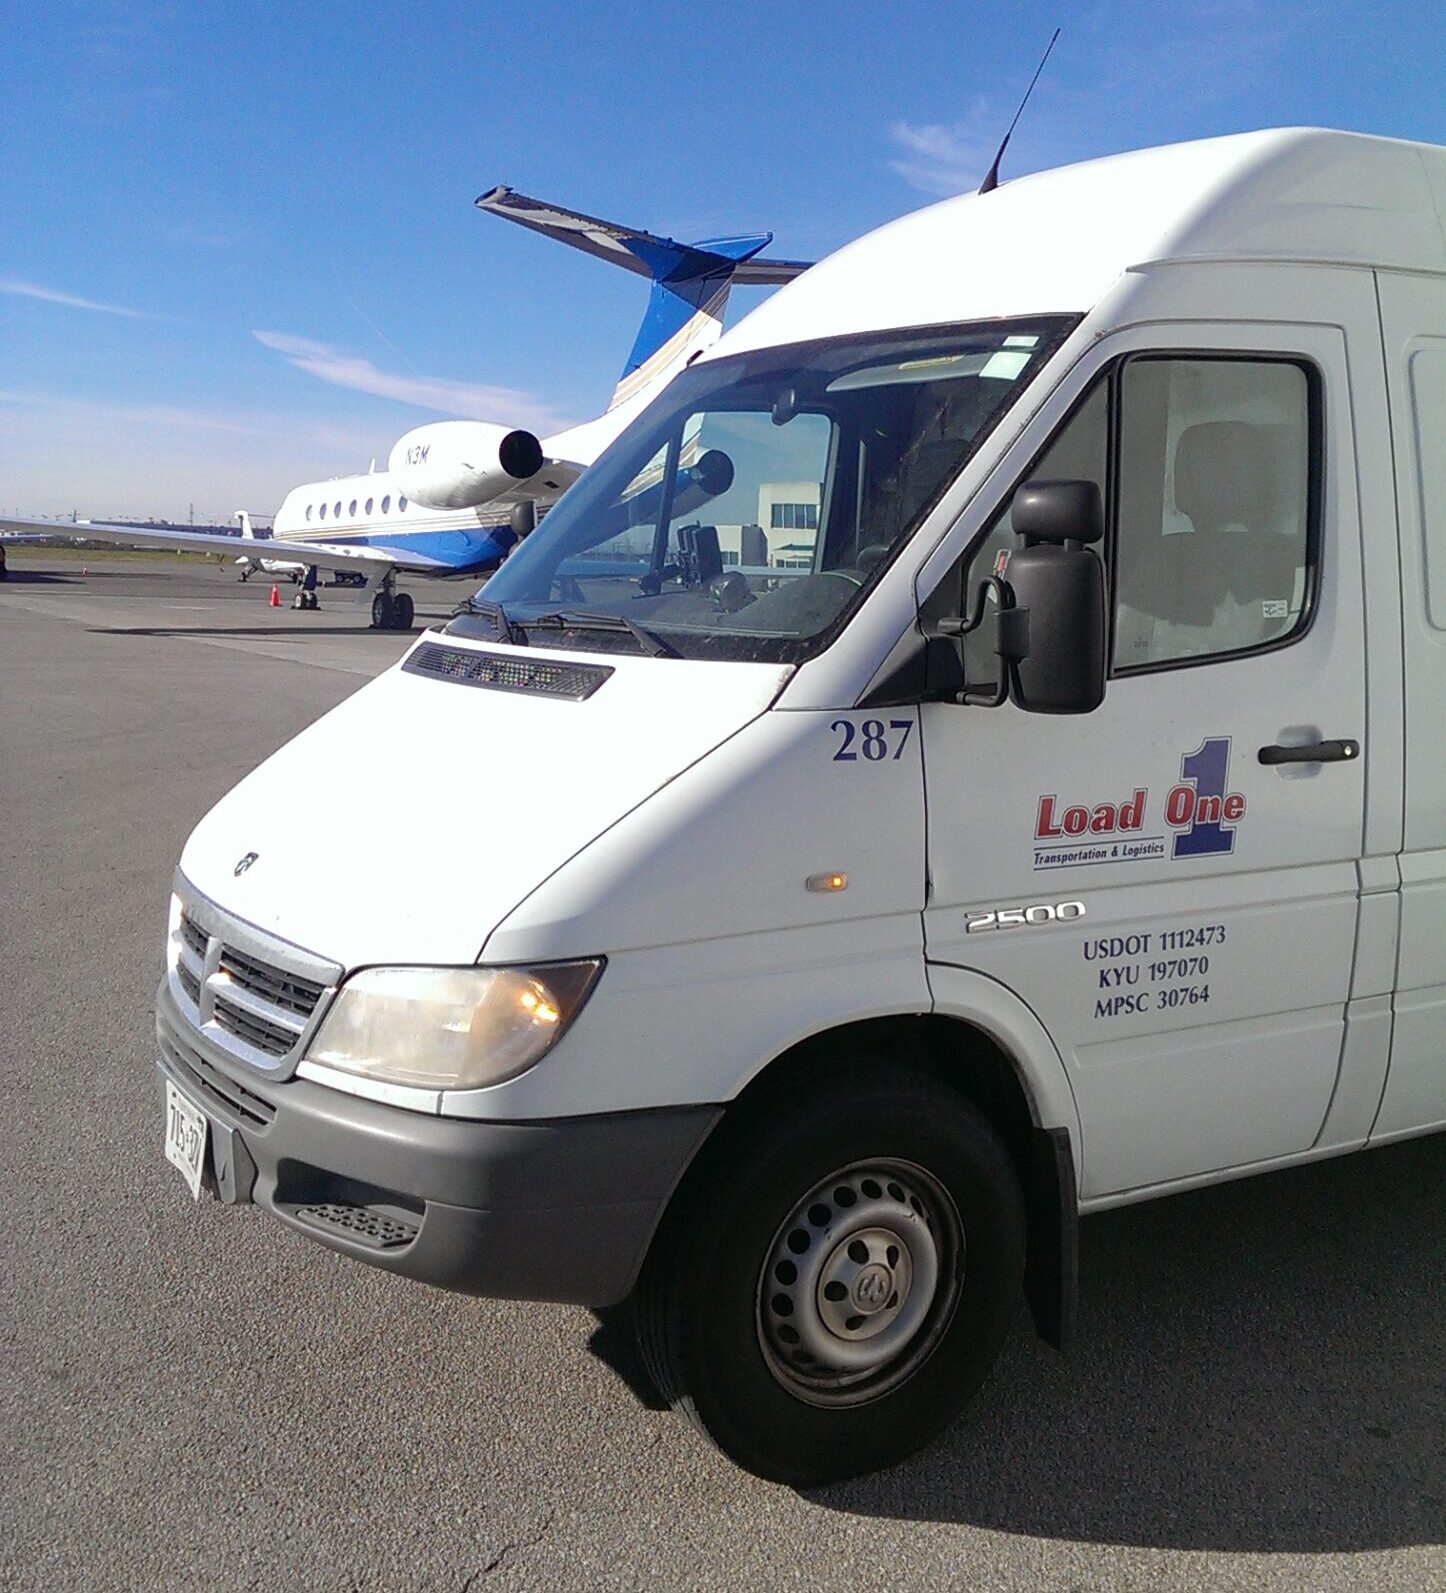 Load one van in front of airplane